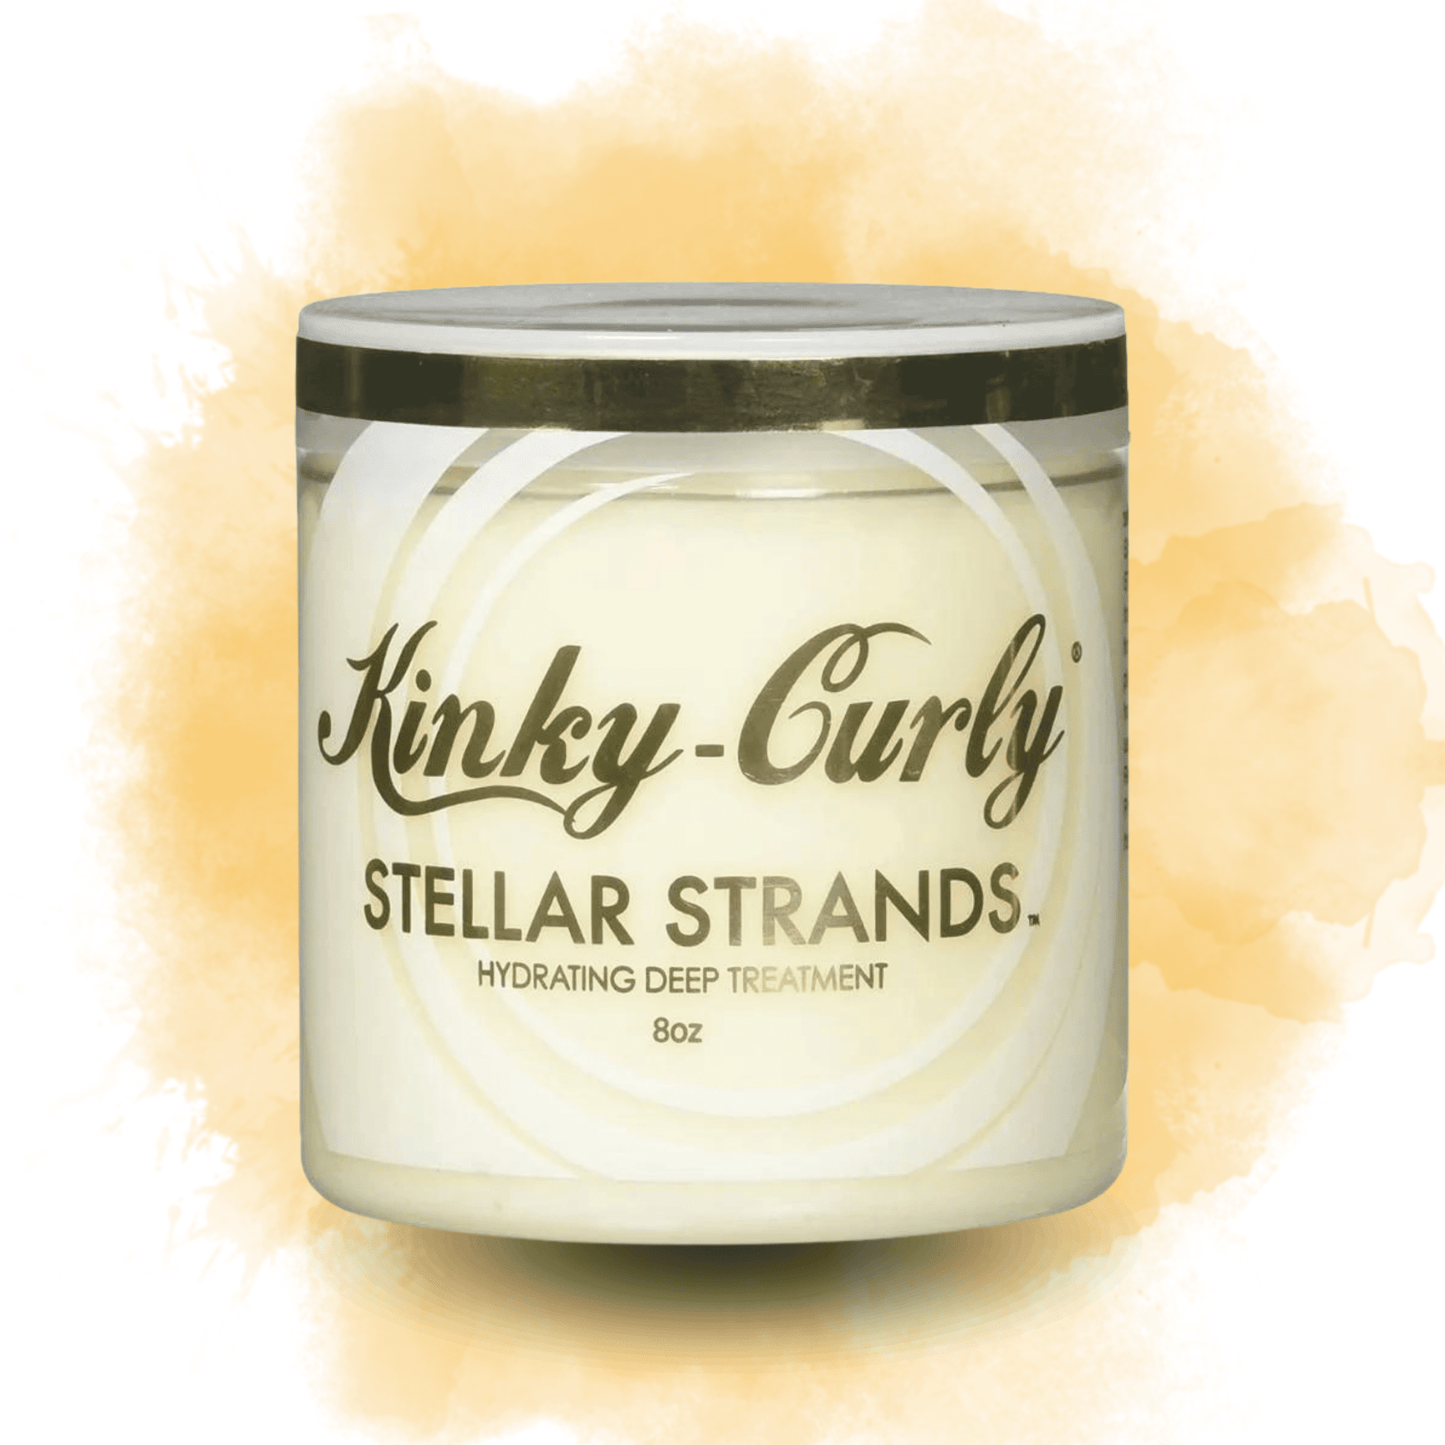 Kinky-Curly - Masque capillaire Hydratant "stellar strands" - 236ml - Kinky Curly - Ethni Beauty Market